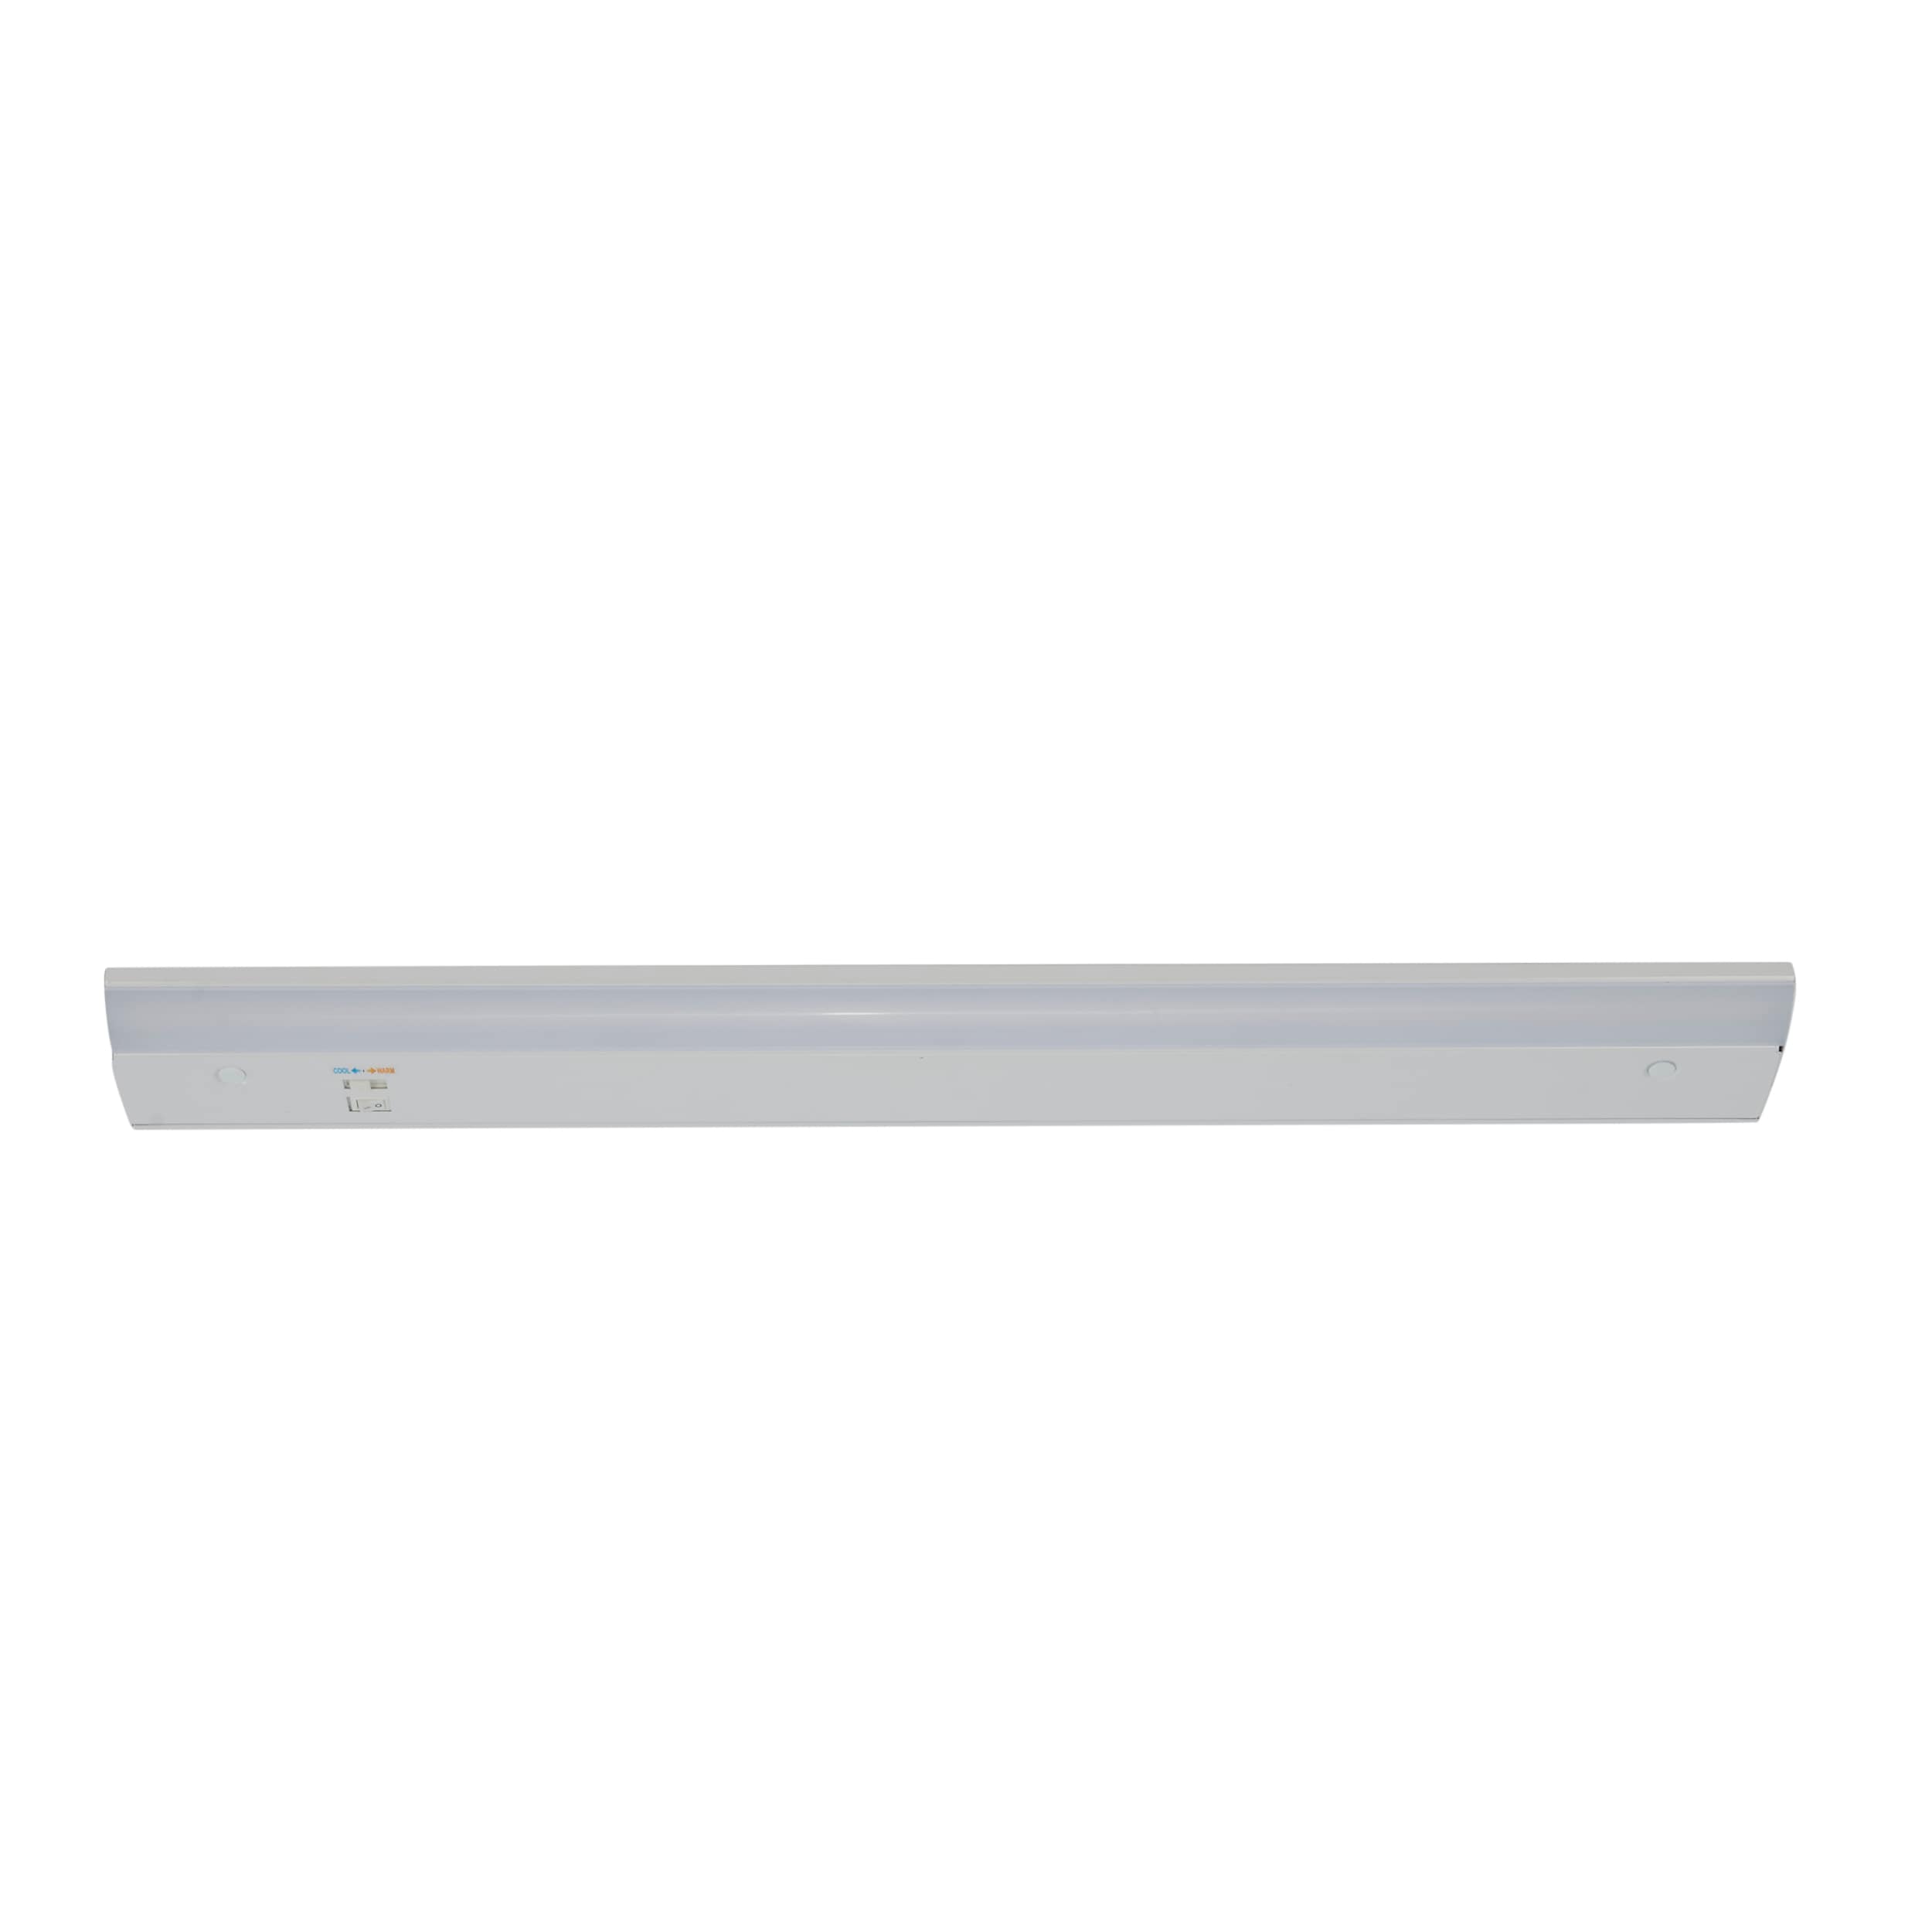 14-Inch Xenon Under Cabinet Light Direct-Wire 120V White by Juno Lighting  Group, UPX214 WH